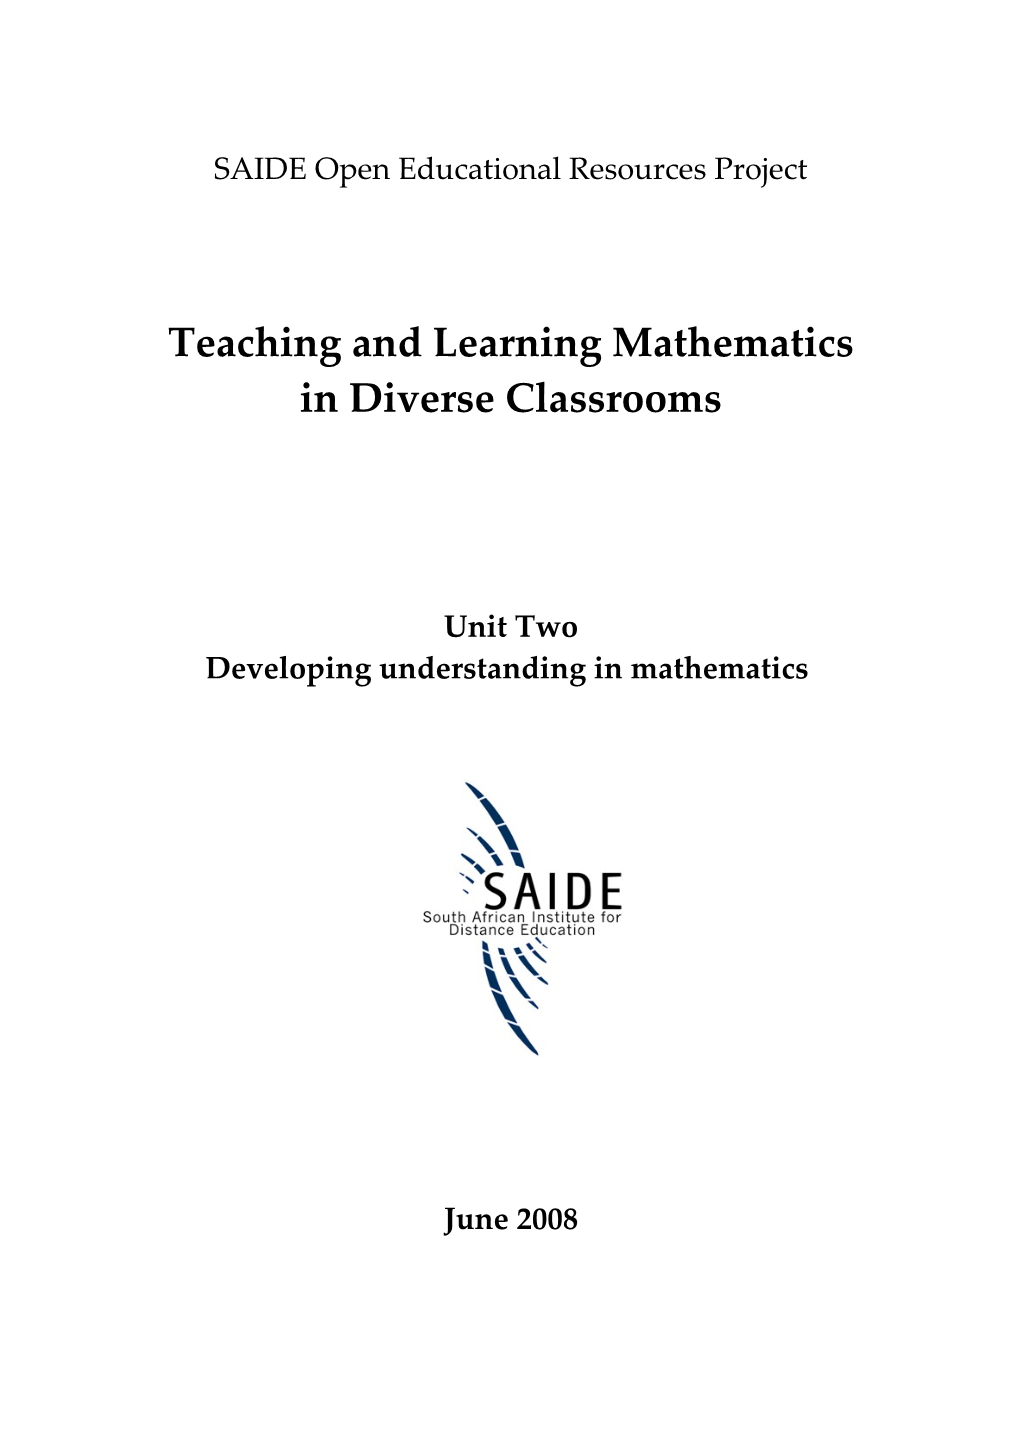 Teaching and Learning Mathematics in Diverse Classrooms